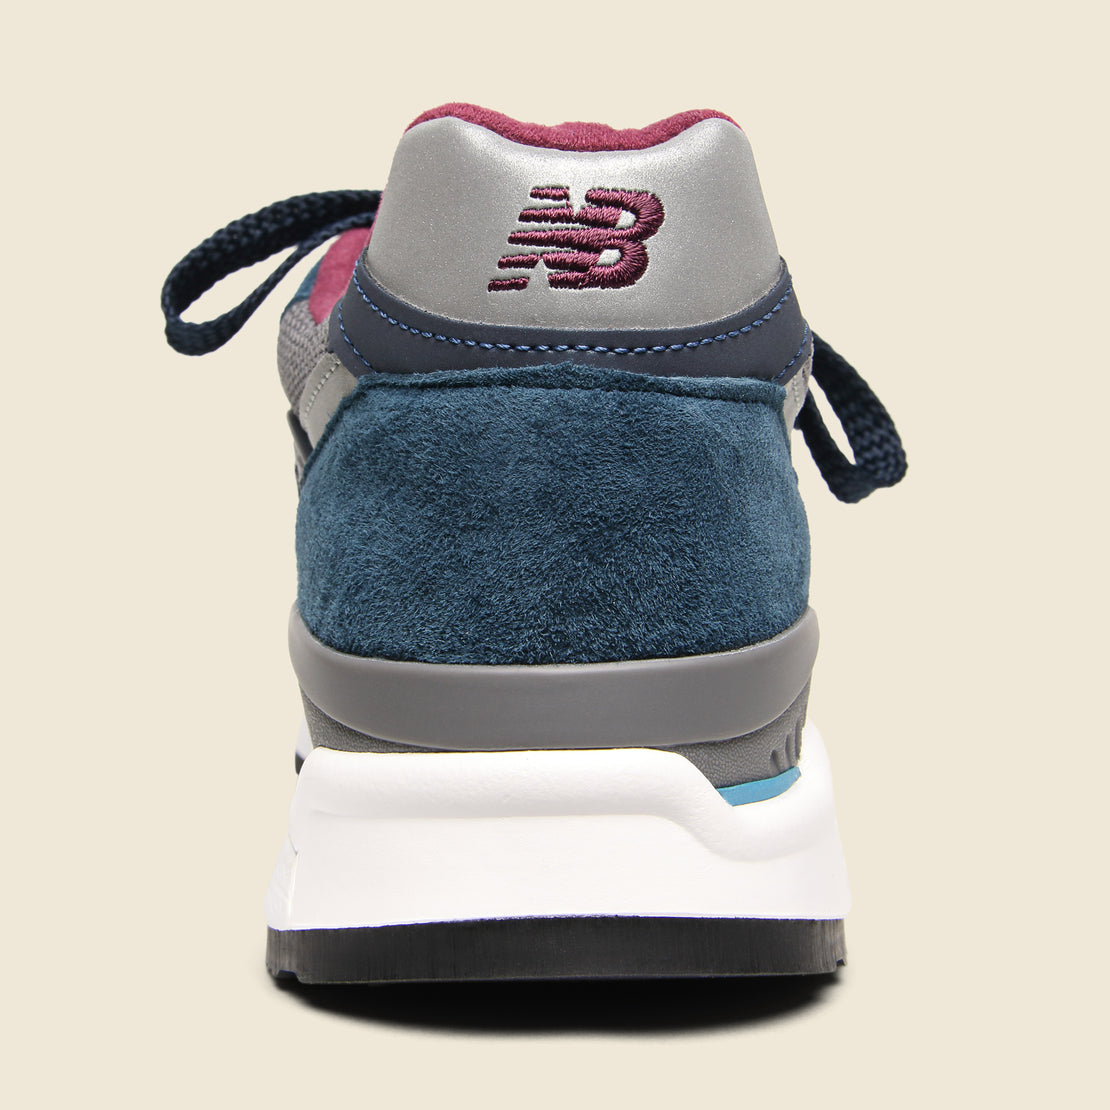 998 Sneaker - Blue/Grey - New Balance - STAG Provisions - Shoes - Athletic